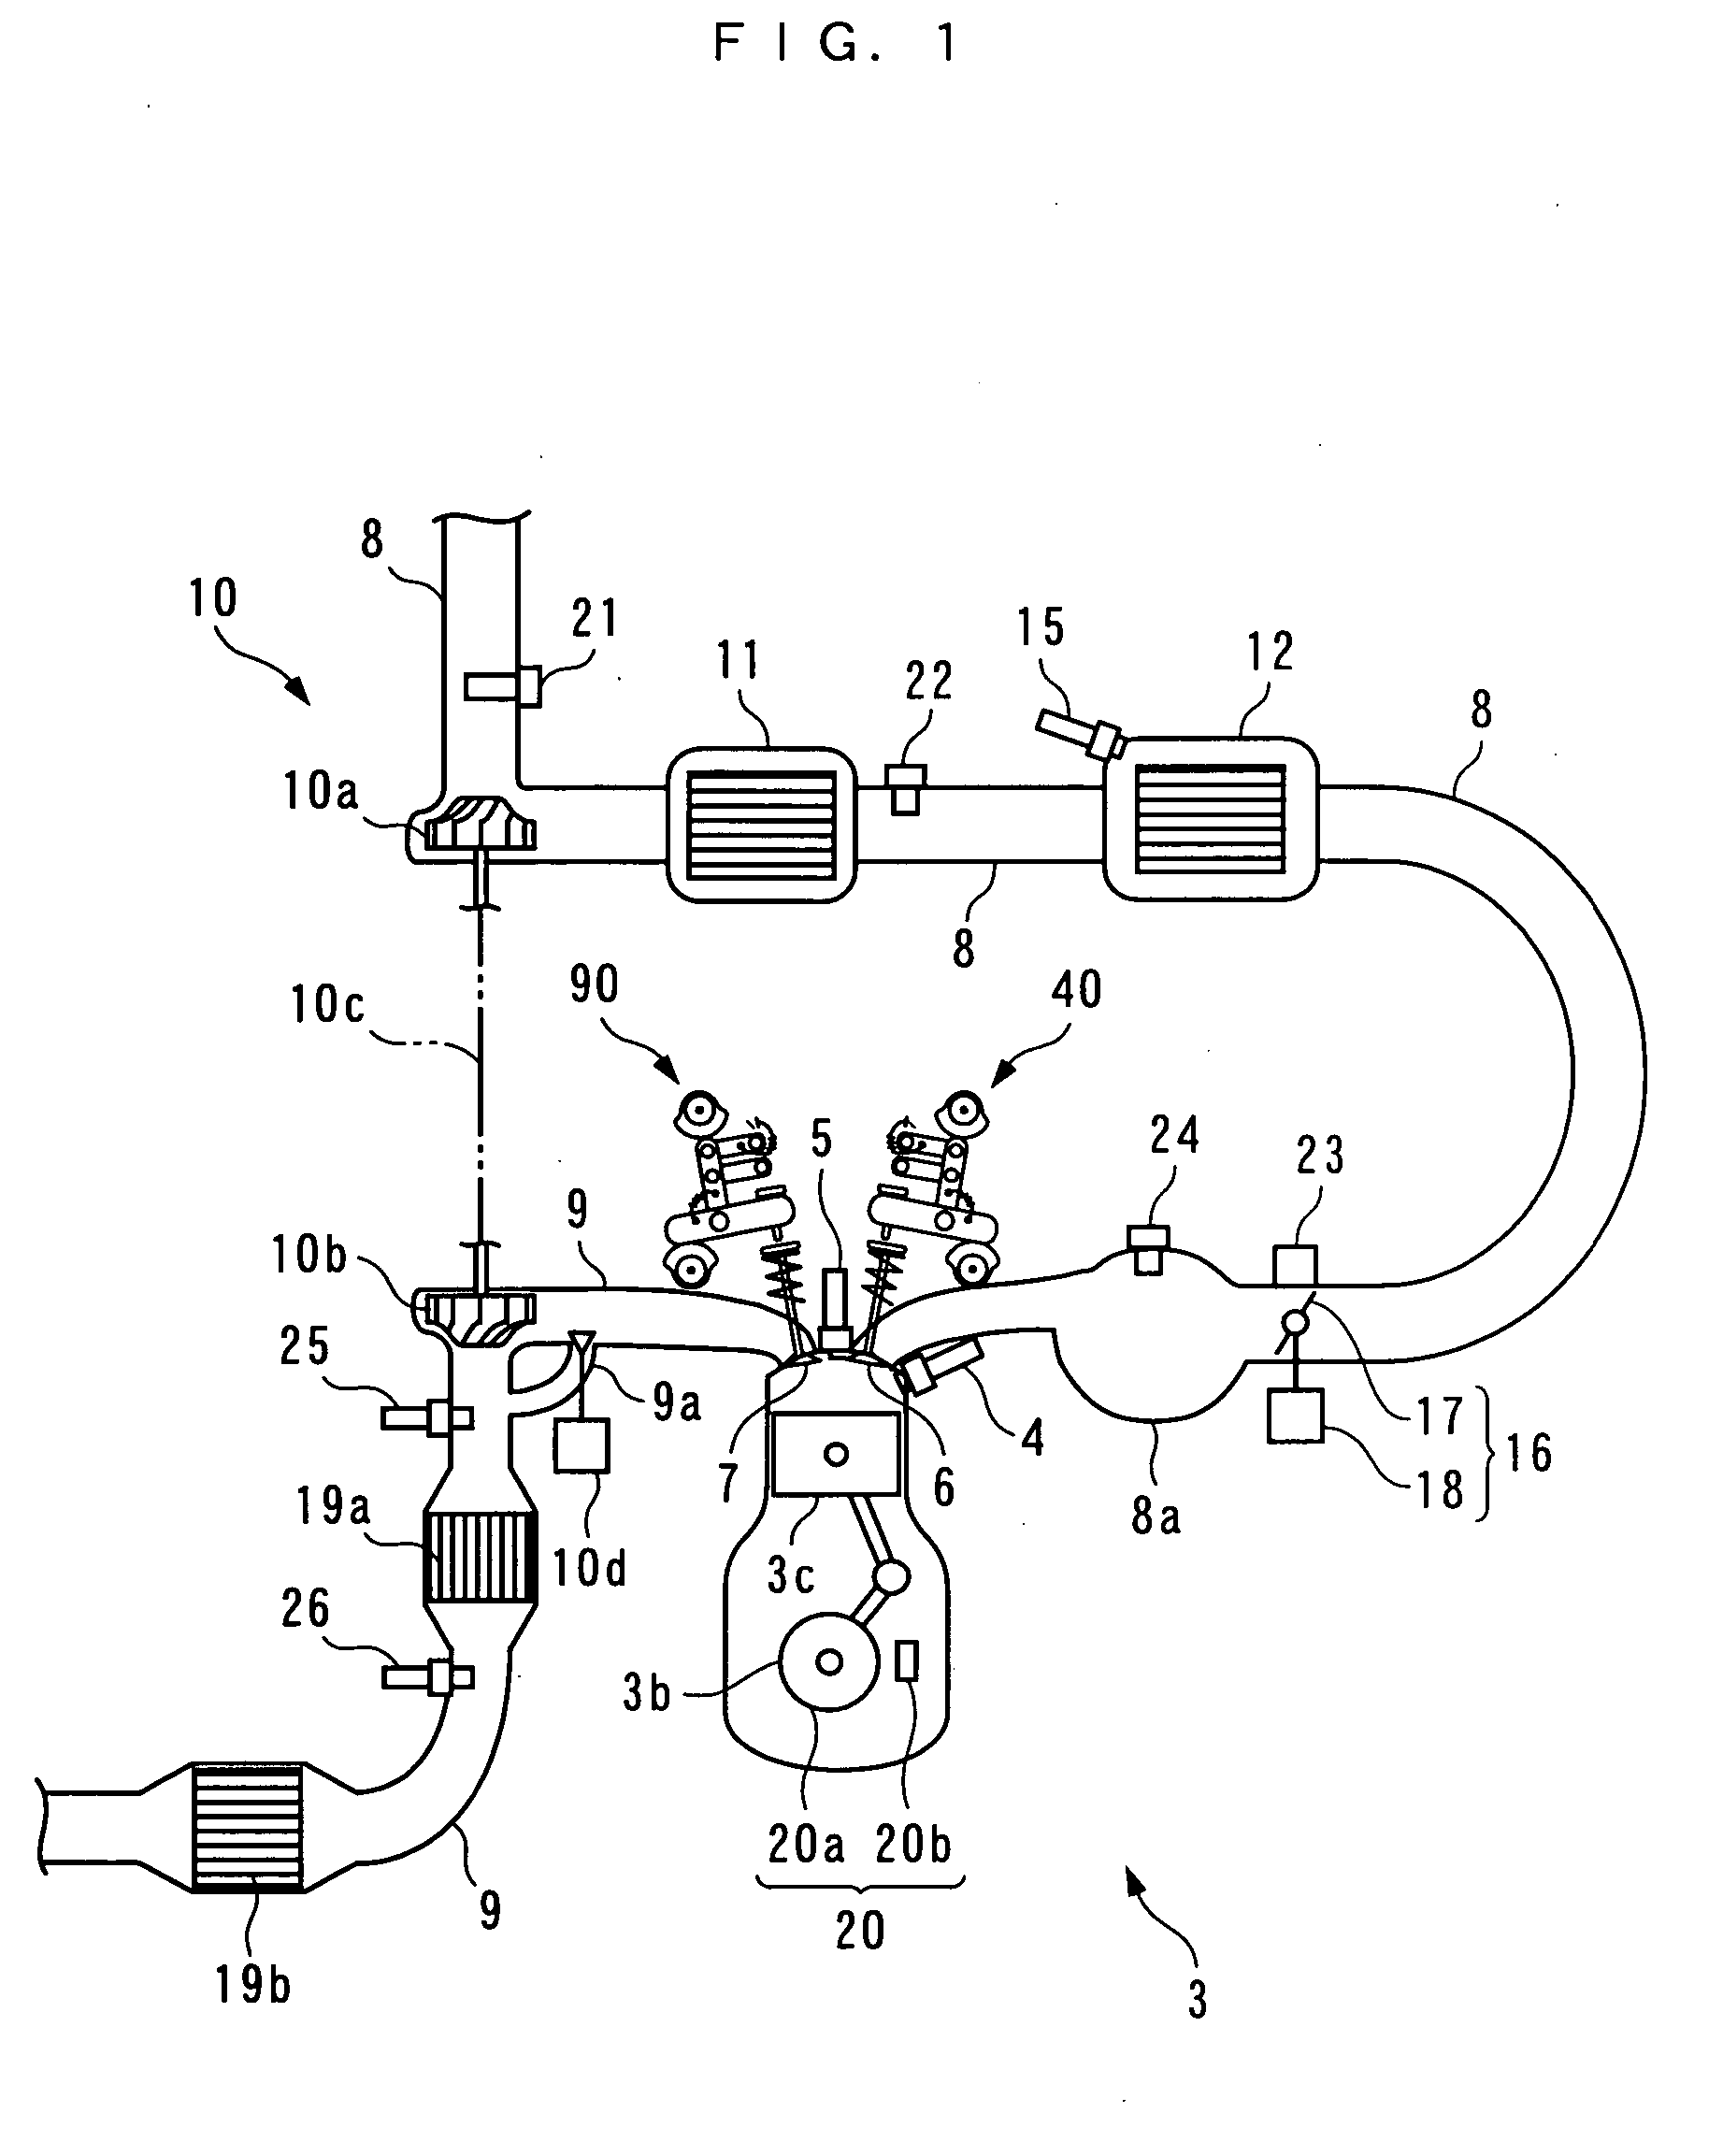 Intake airvolume controller of internal combustion engine